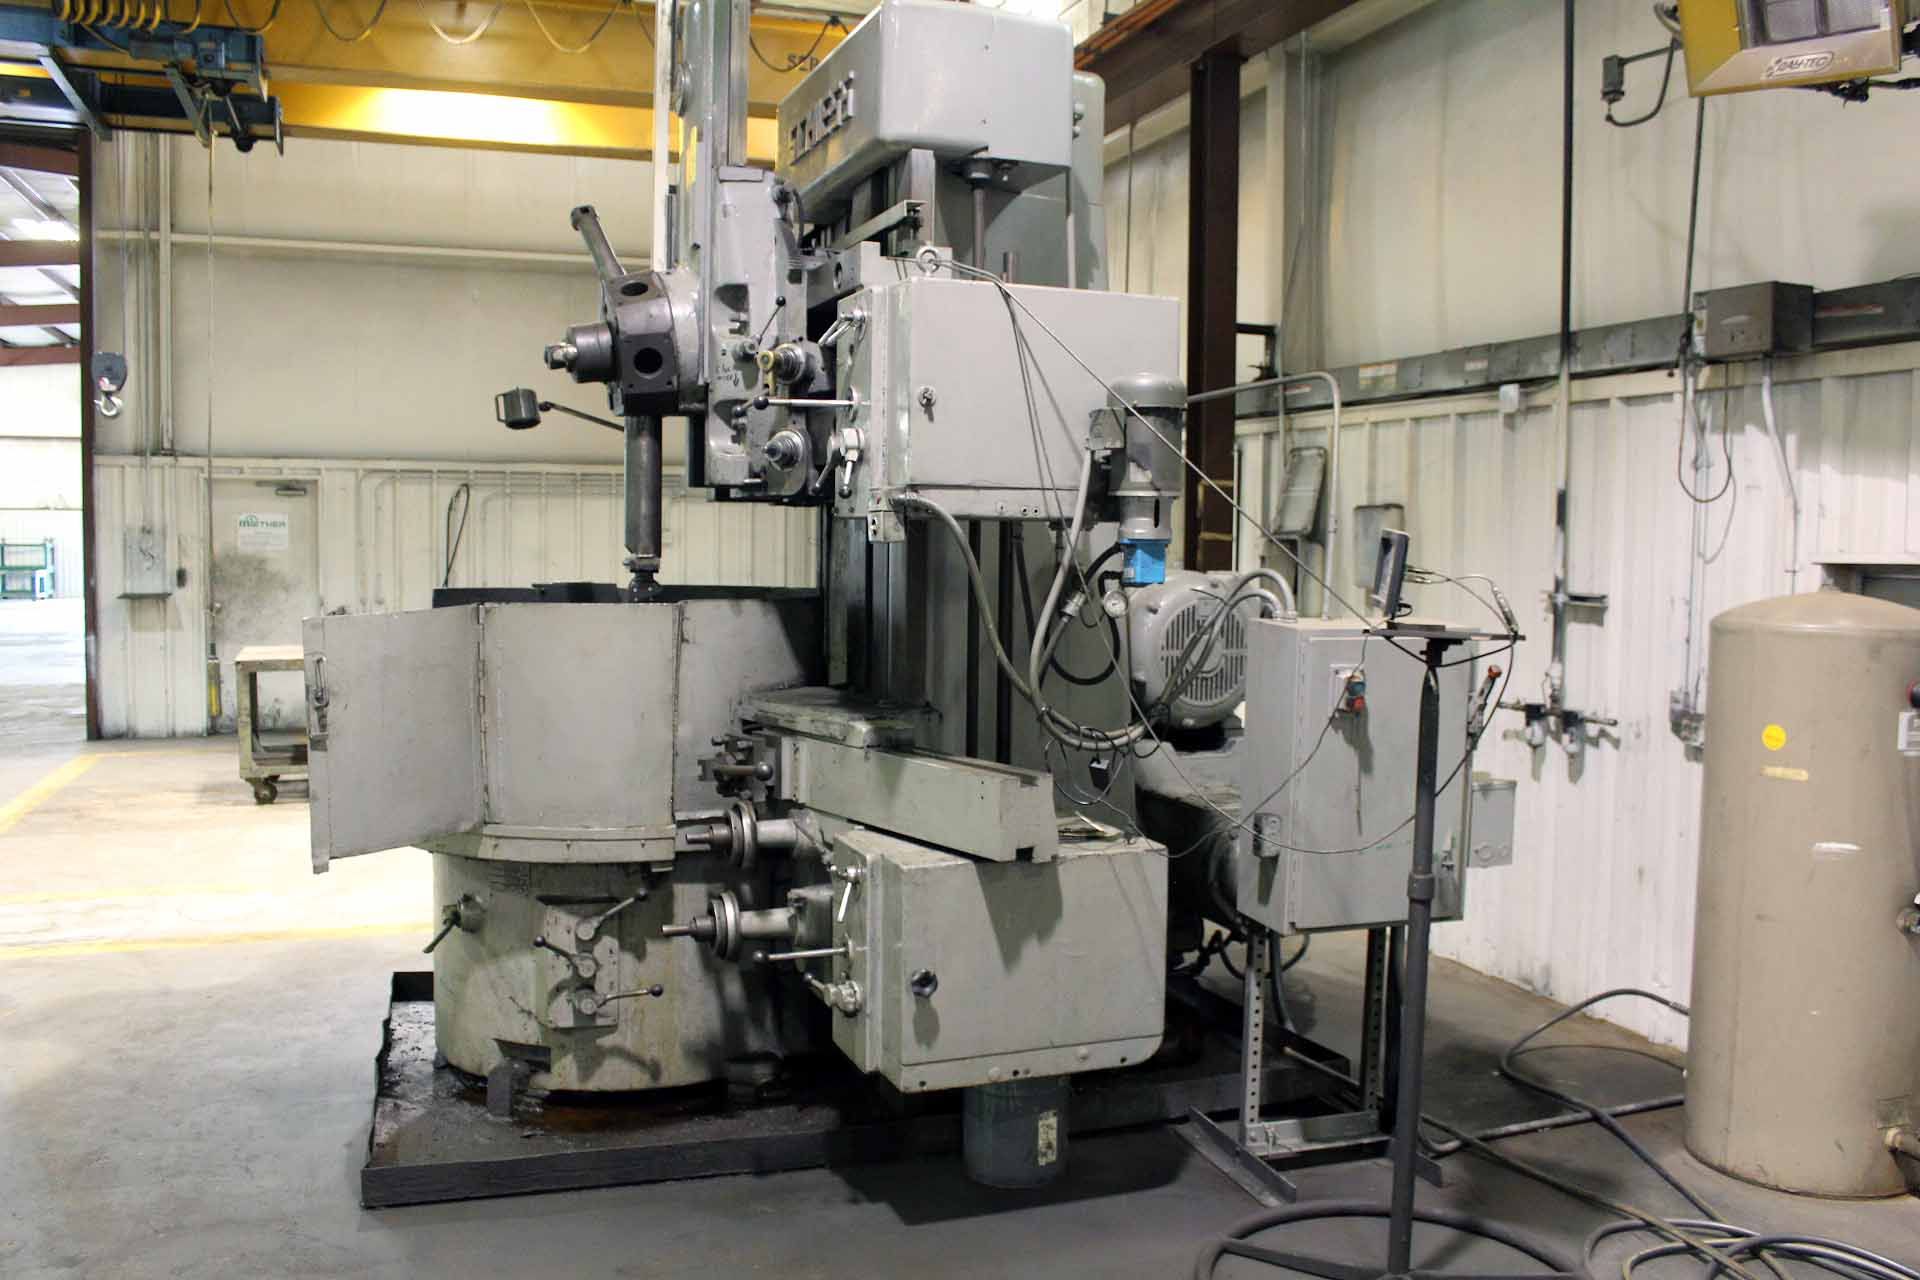 VERTICAL TURRET LATHE, SCHIESS MDL. 13ED-125, 49.2” table, 55.1” swing, 43.3” turning height, 9, - Image 4 of 6